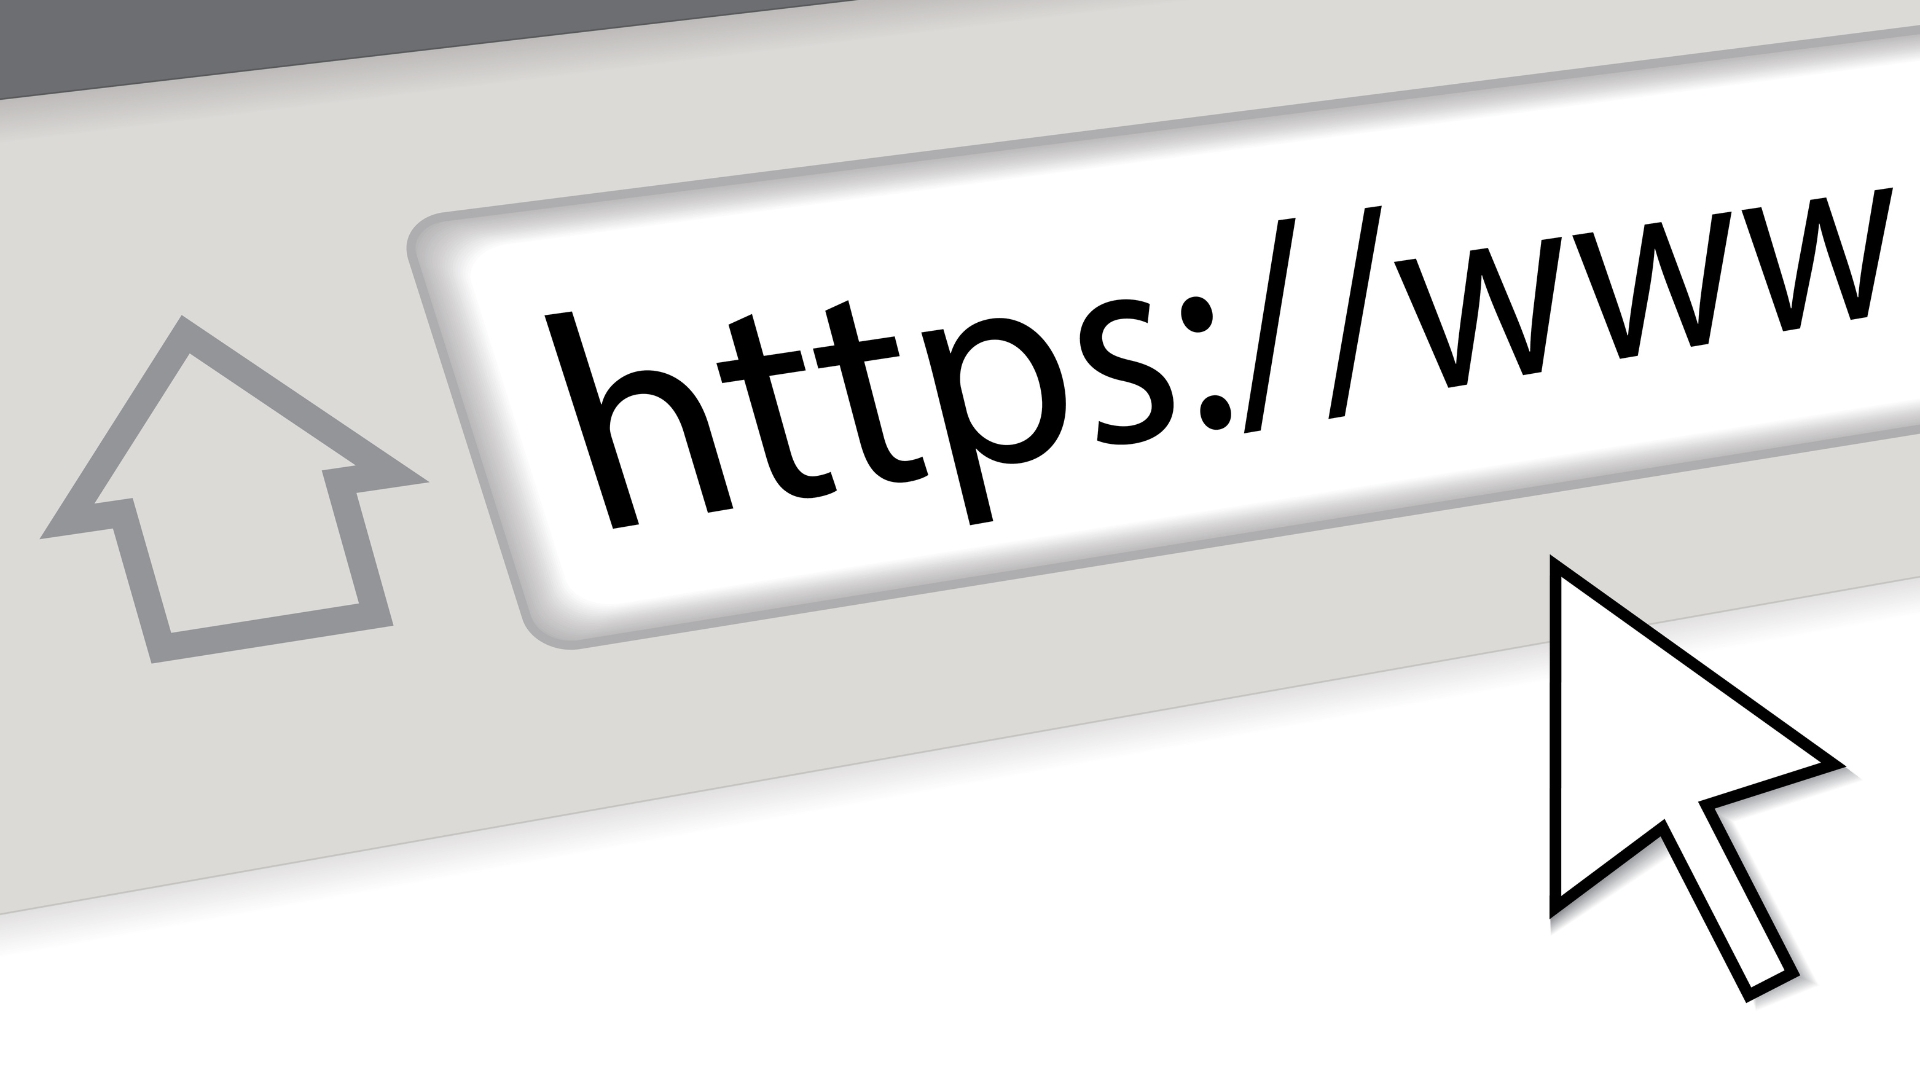 Image showing the URL address bar in the browser of a website, focusing on 